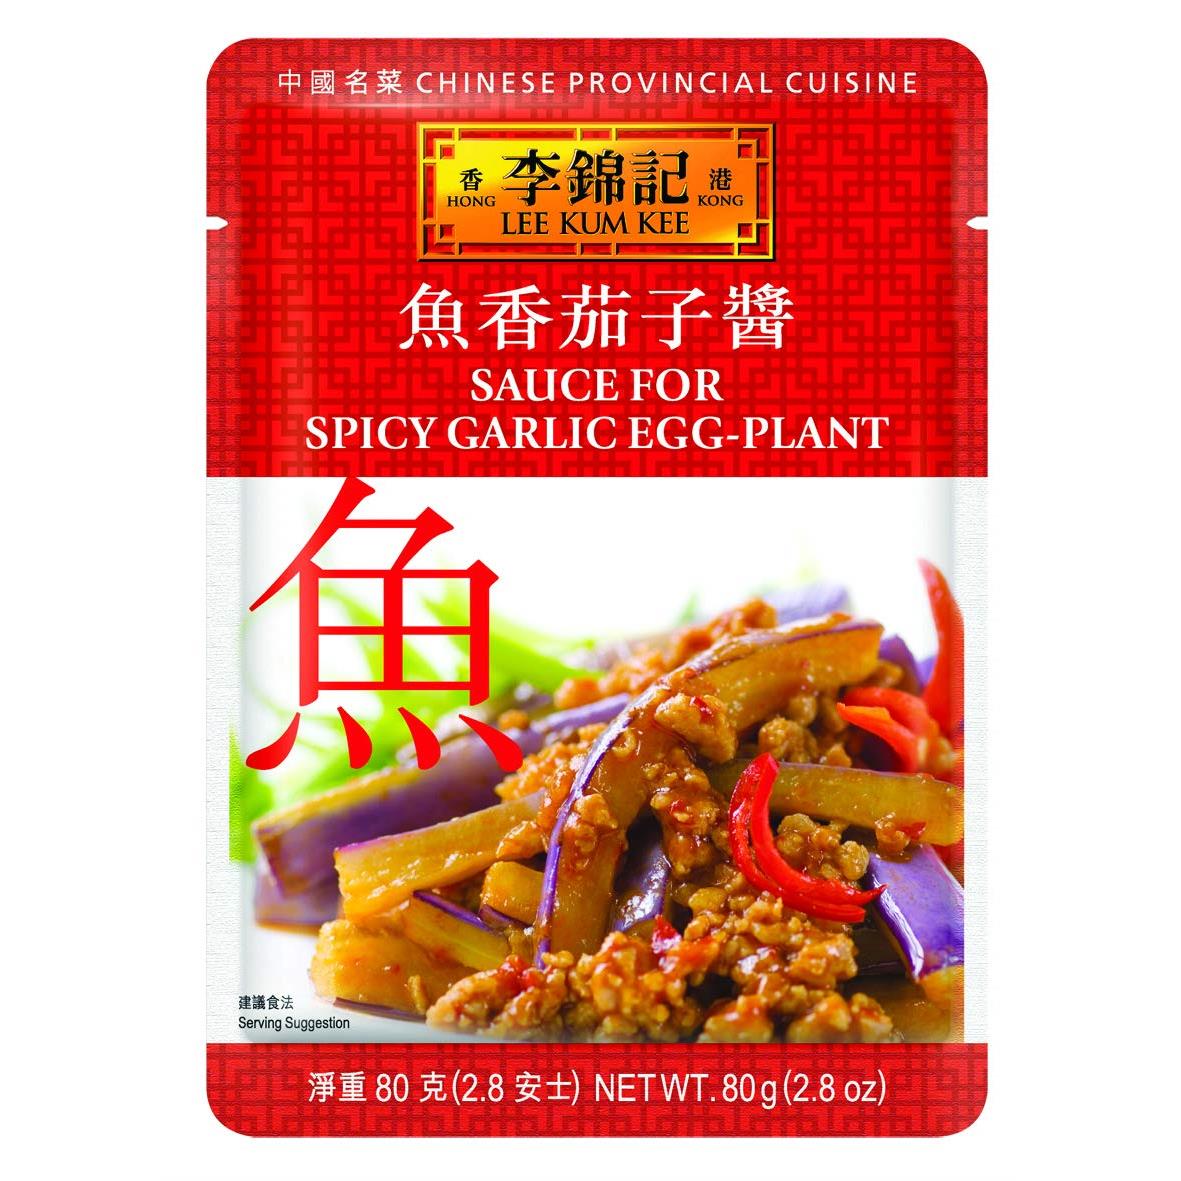 Lee Kum Kee Sauce For Spicy Garlic Eggplant, 2.8-Ounce Pouches (Pack of 12)